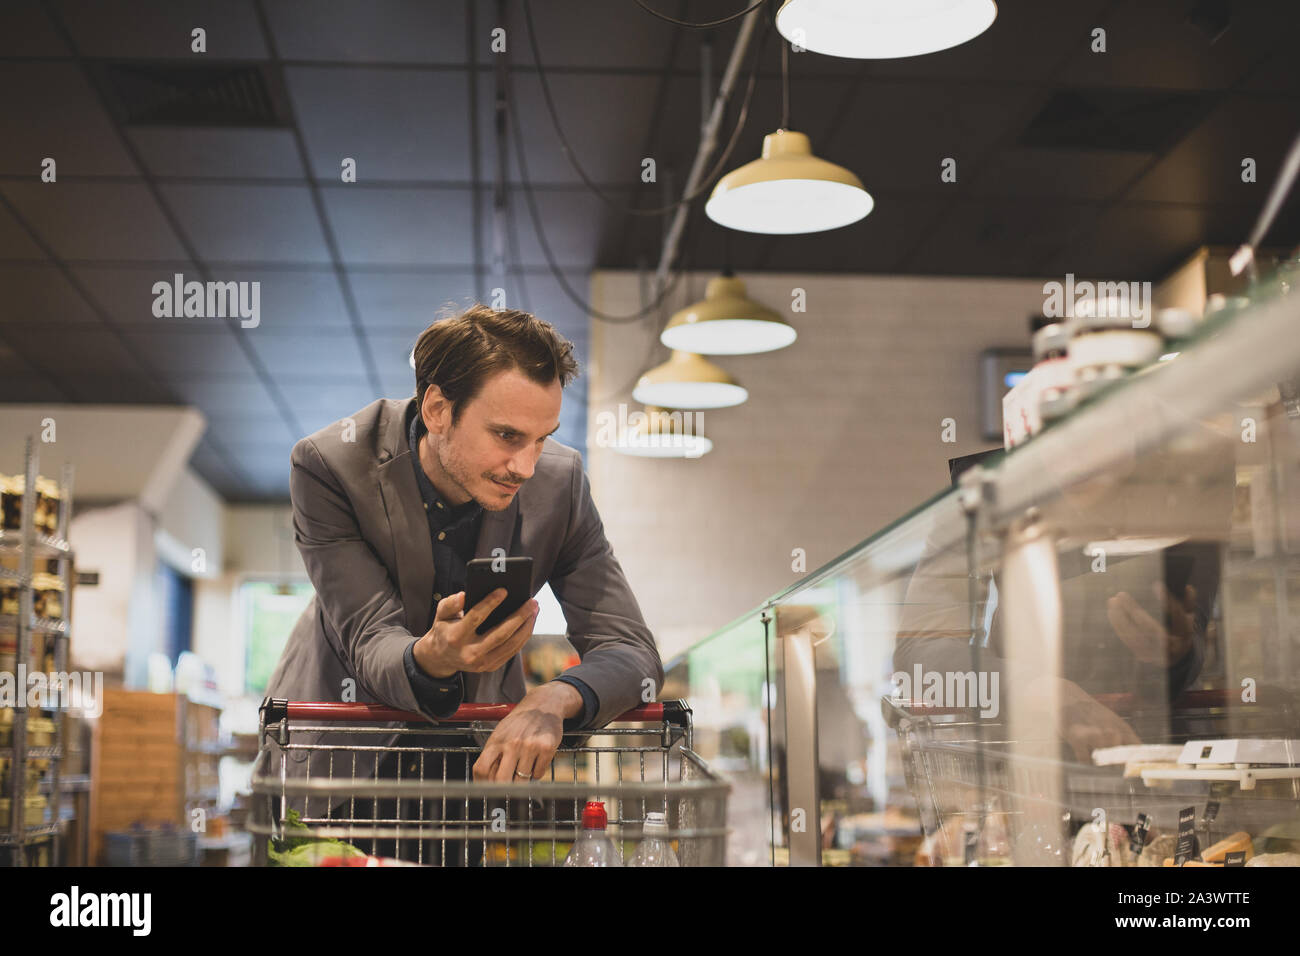 Adult male shopper at deli counter in a grocery store Stock Photo